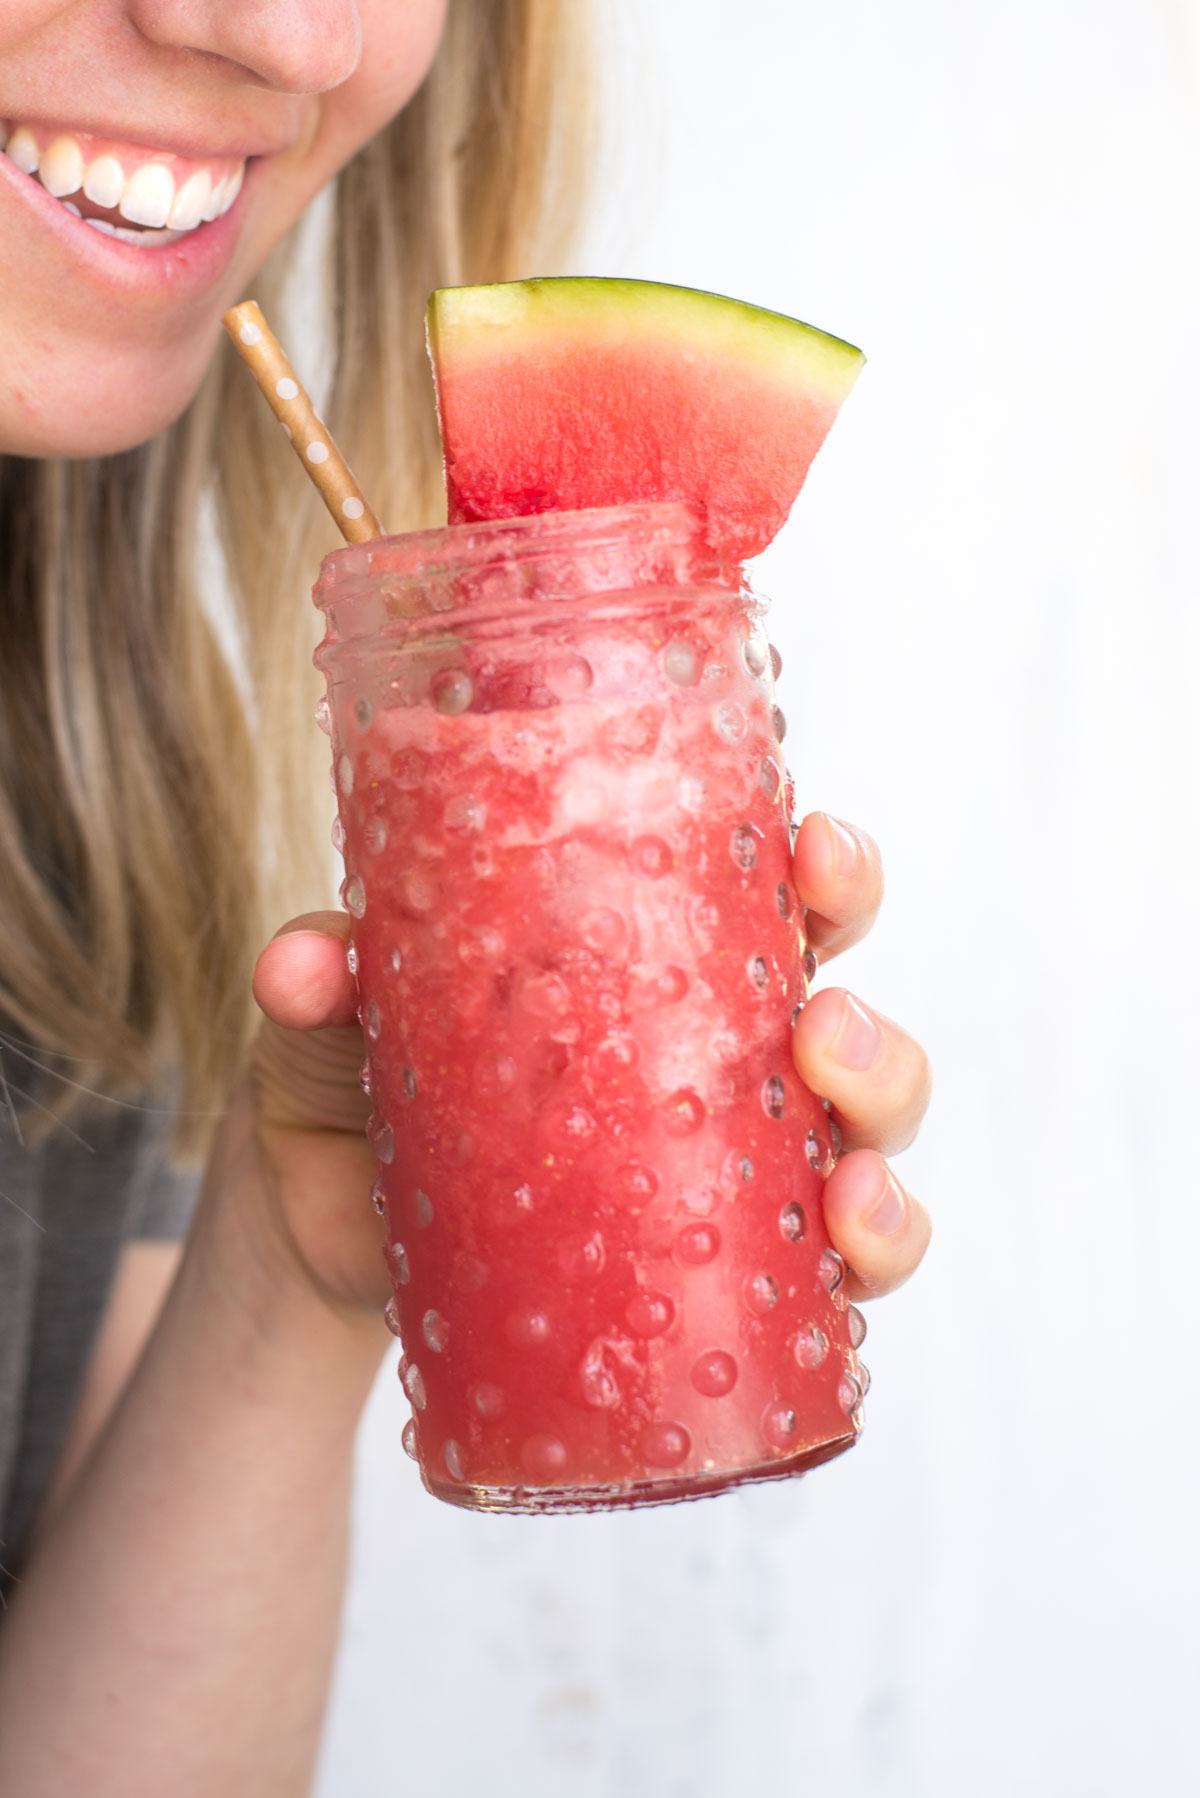 Make this 5-minute blender homemade electrolyte drink and keep yourself cool and hydrated this summer.